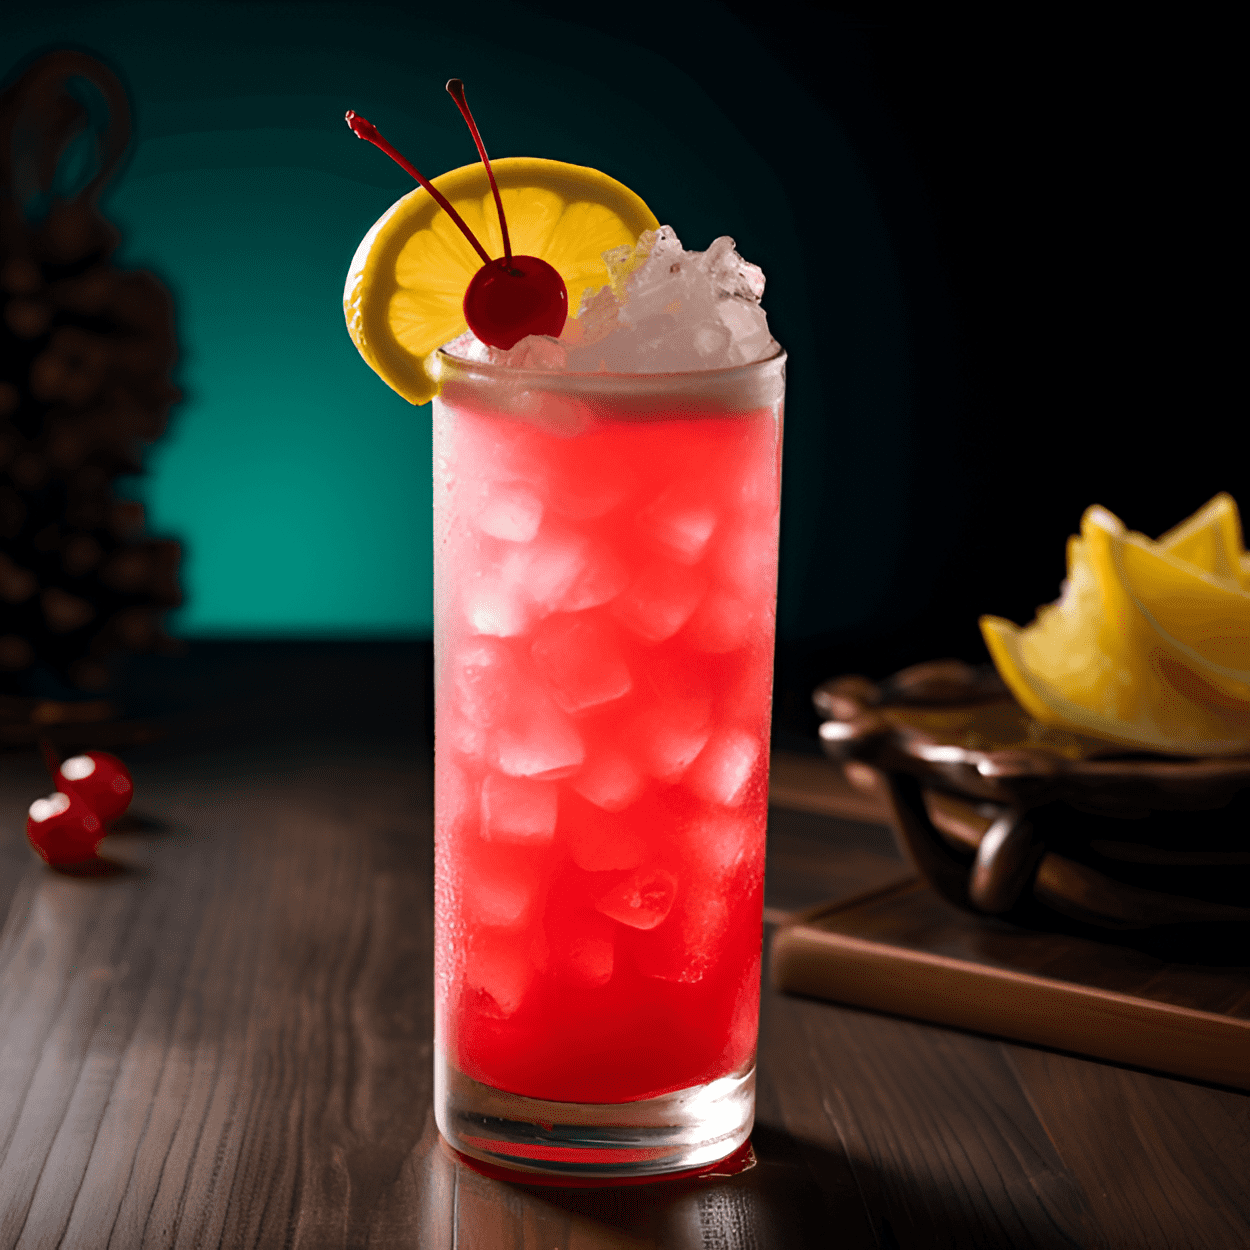 Kinky Cocktail Recipe - The Kinky Cocktail is sweet and fruity, with a slight tartness from the cranberry juice. The Kinky liqueur adds a unique blend of tropical and citrus flavors, while the vodka gives it a bit of a kick. Overall, it's a light and refreshing cocktail with a vibrant, playful taste.